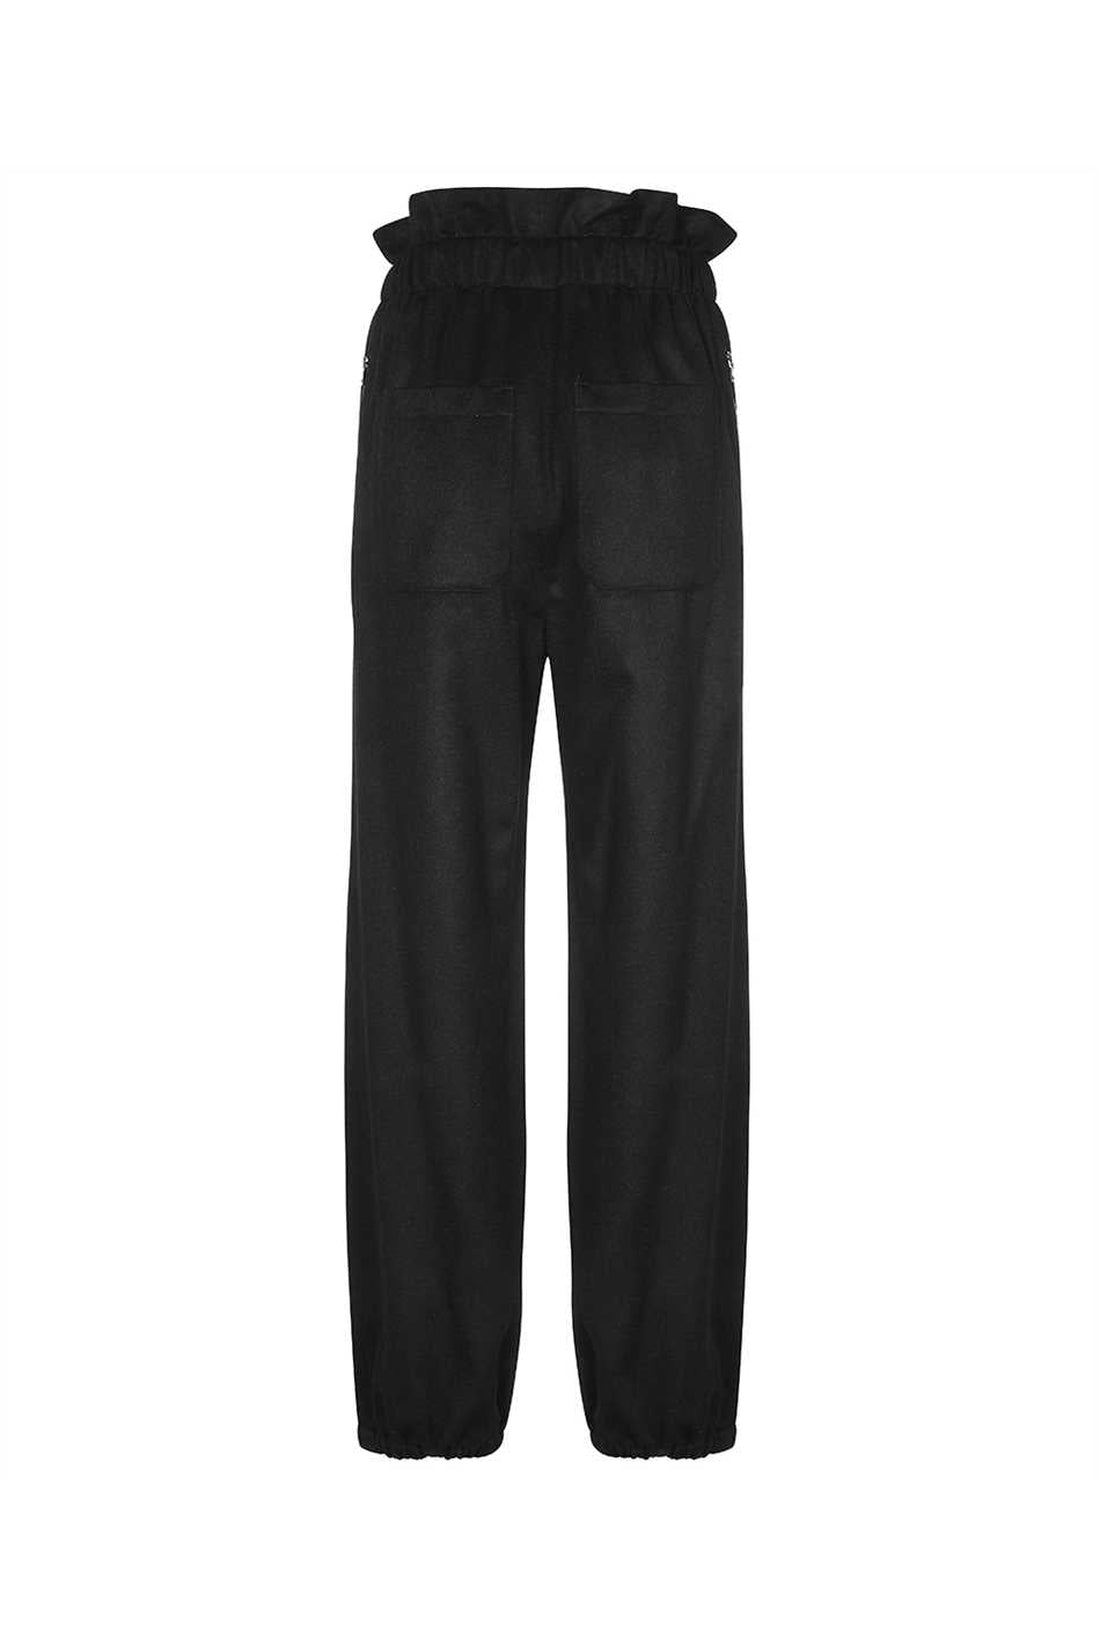 Max Mara-OUTLET-SALE-Tana wool trousers-ARCHIVIST